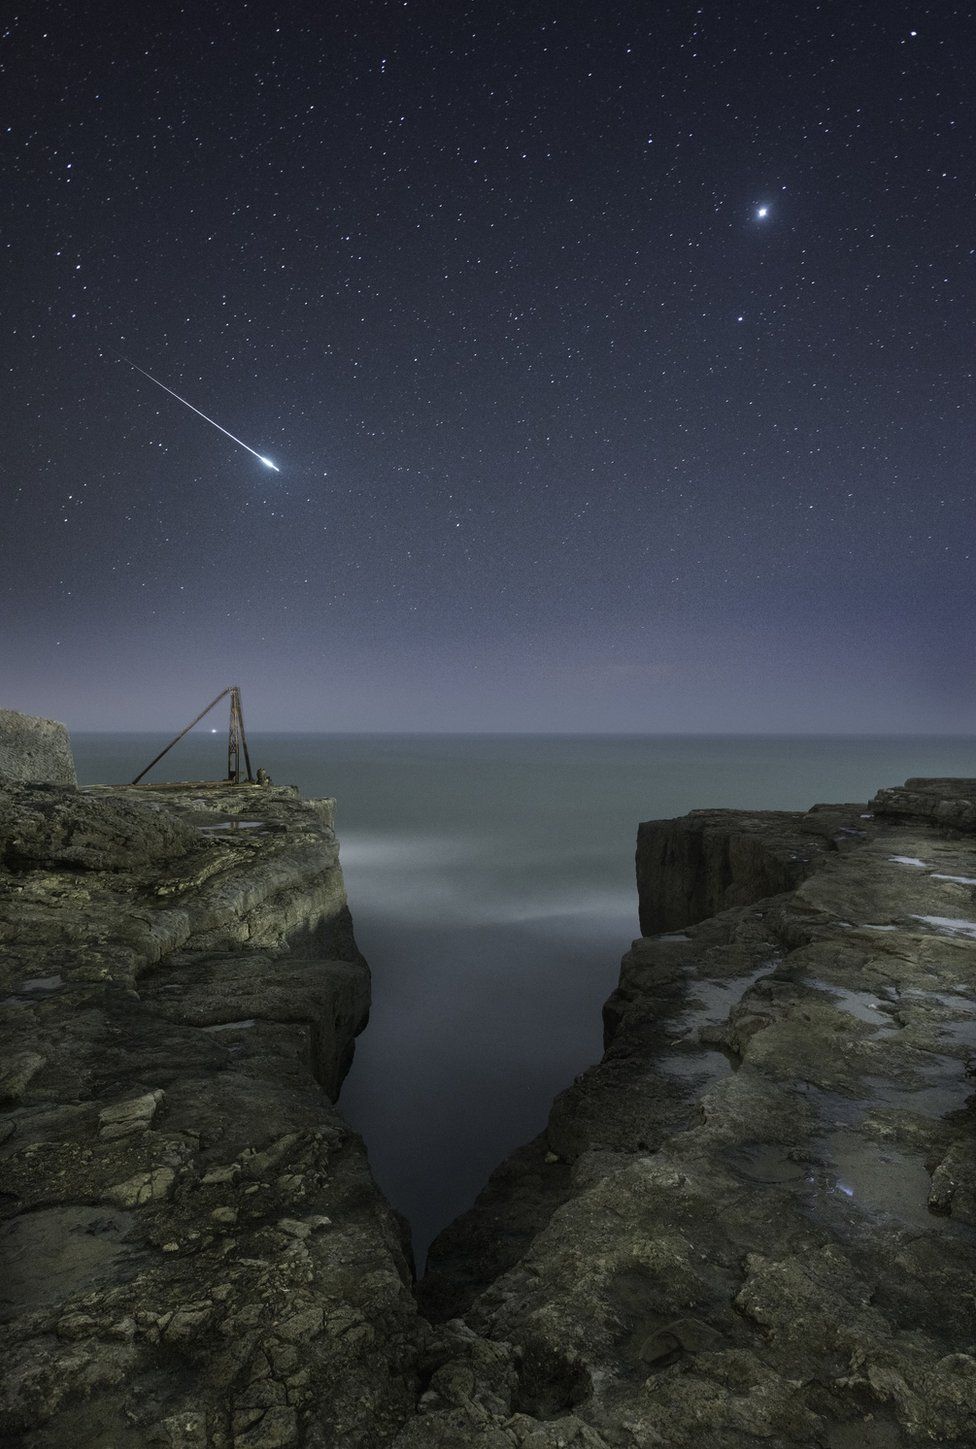 A shooting star flashes across the sky over the craggy landscape